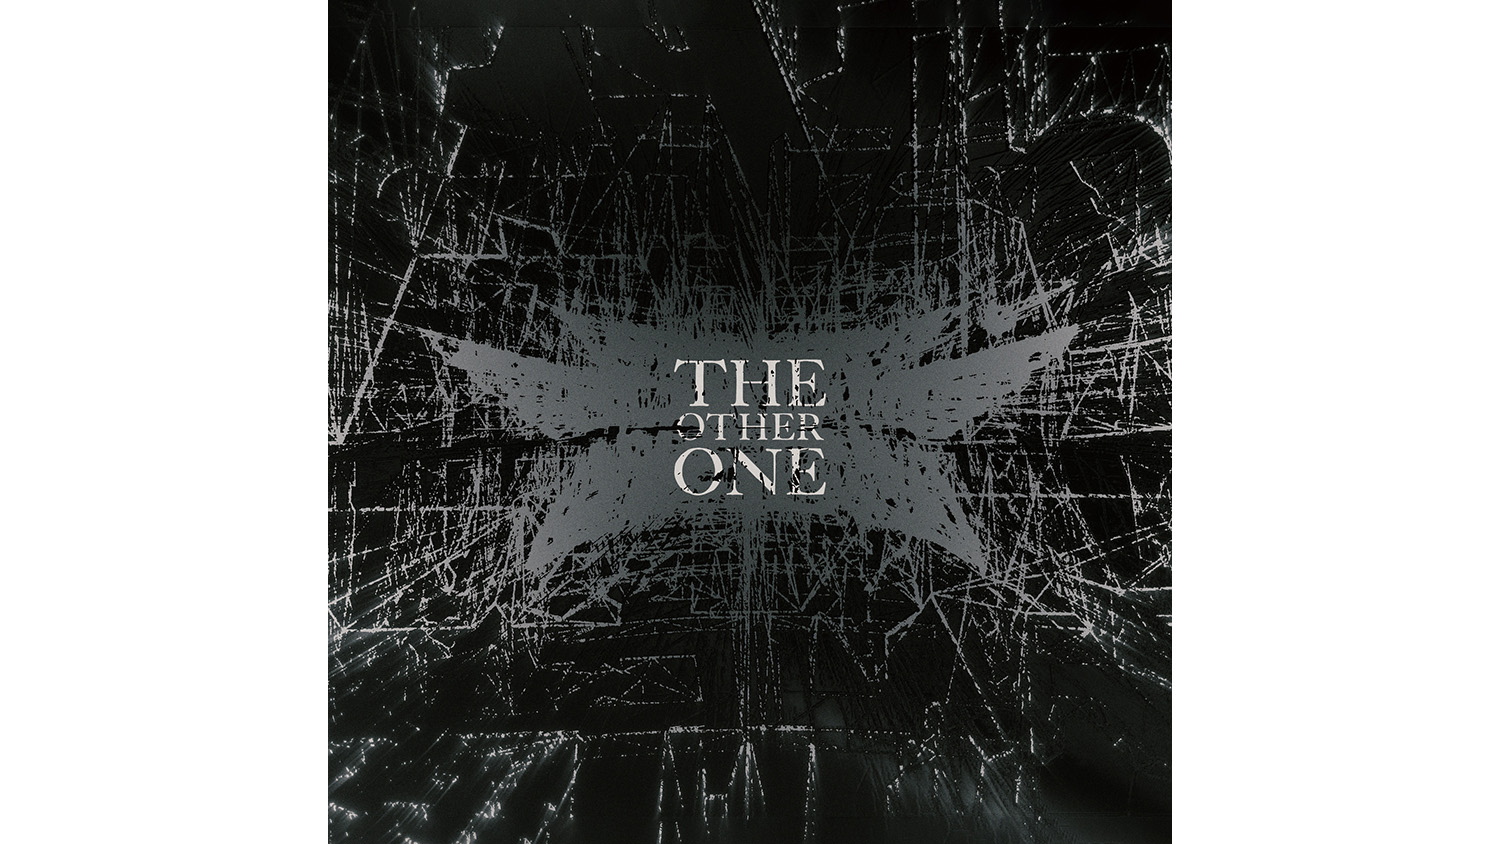 BABYMETAL-THE OTHER ONE-(THE ONE限定盤) - ミュージック